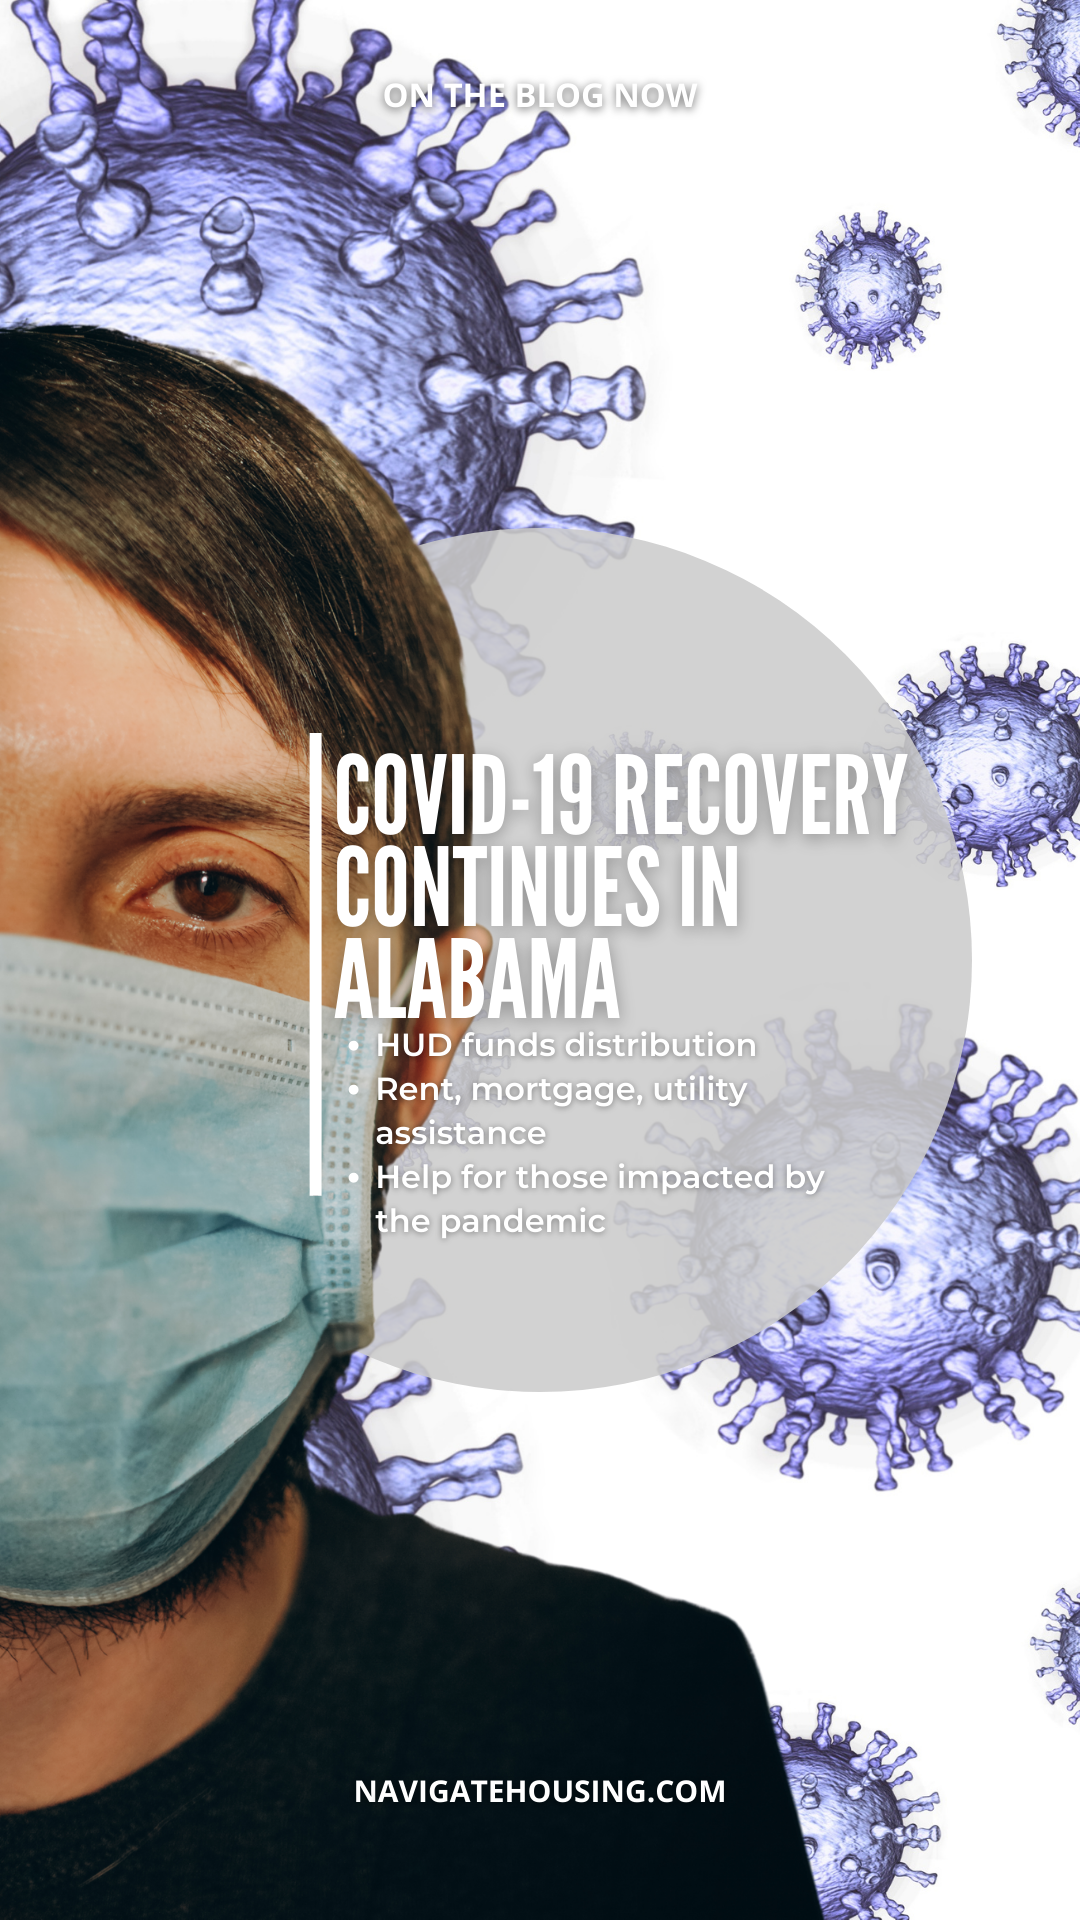 Covid-19 Recovery Continues in Alabama